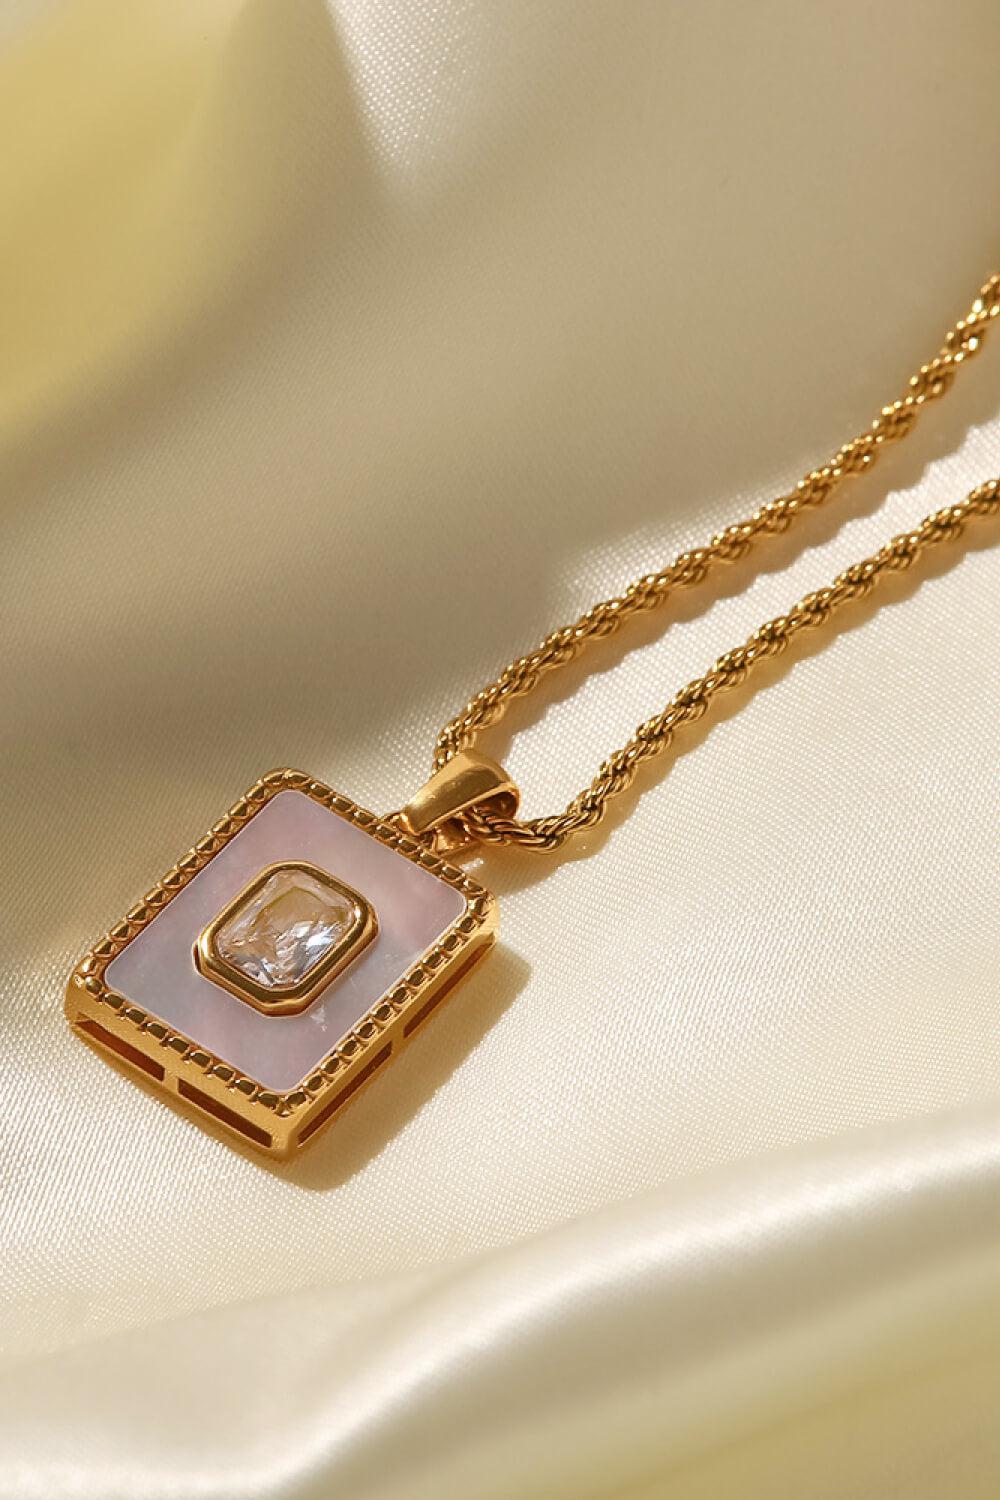 Square Pendant Twisted Chain Necklace BLUE ZONE PLANET